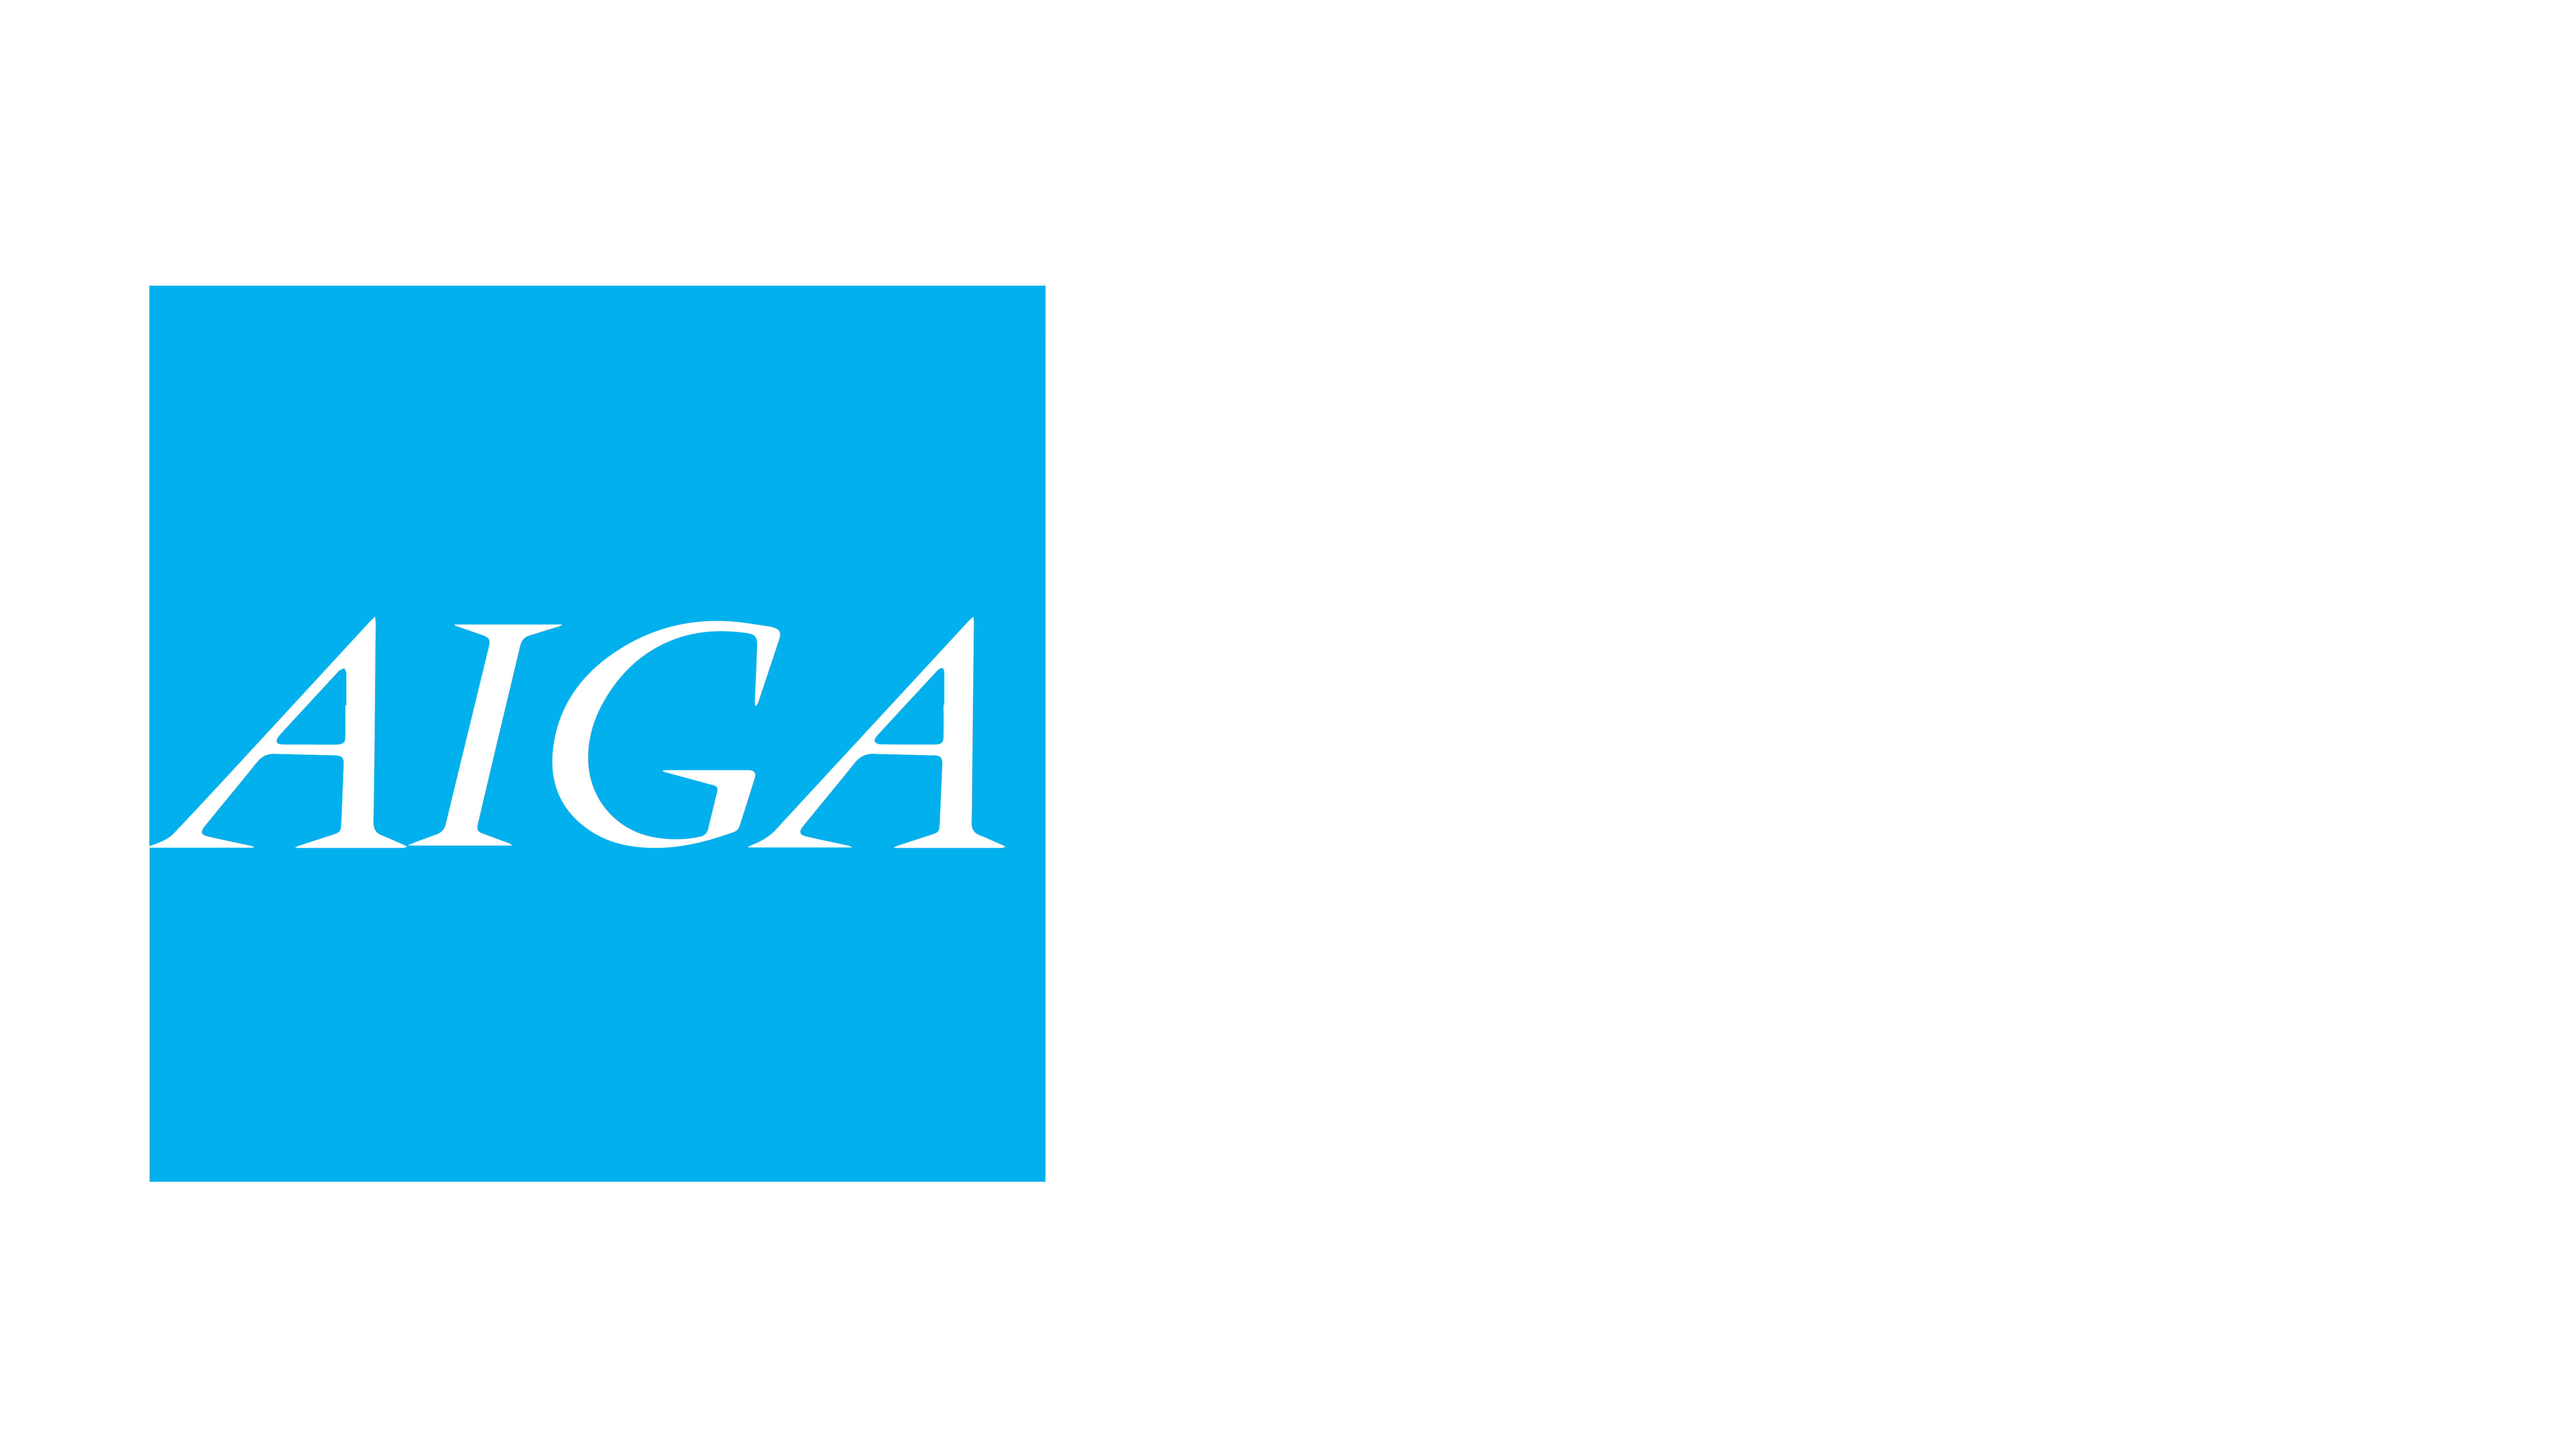 The Ask + Give logo